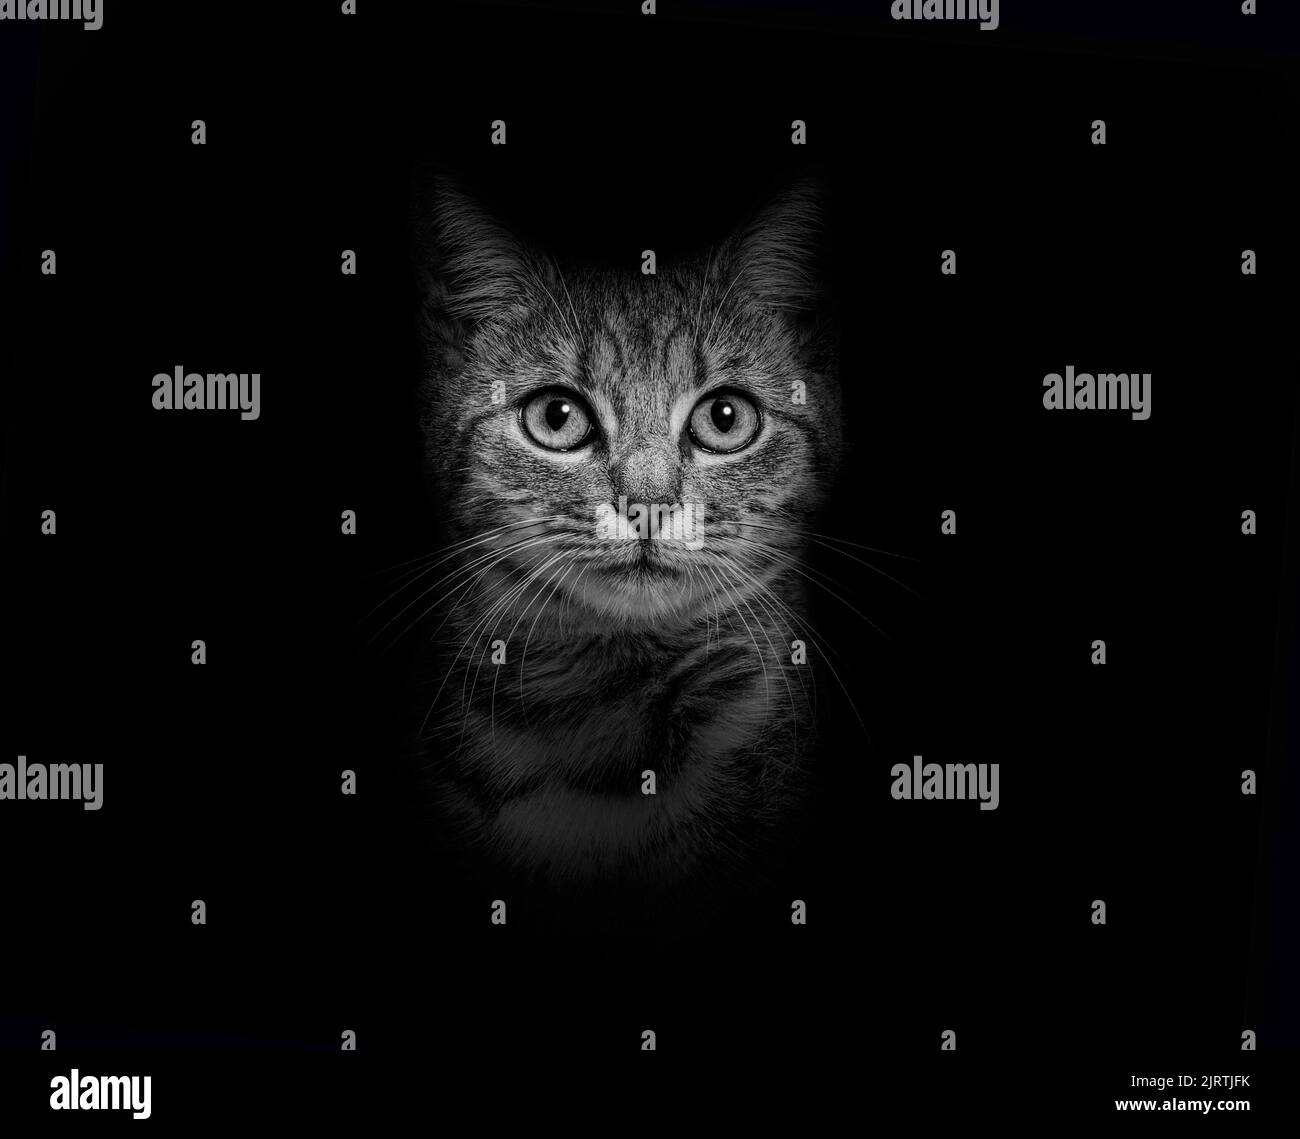 Black and white Portrait of a Grey stripped Tabby mixed-breed cat on black background Stock Photo